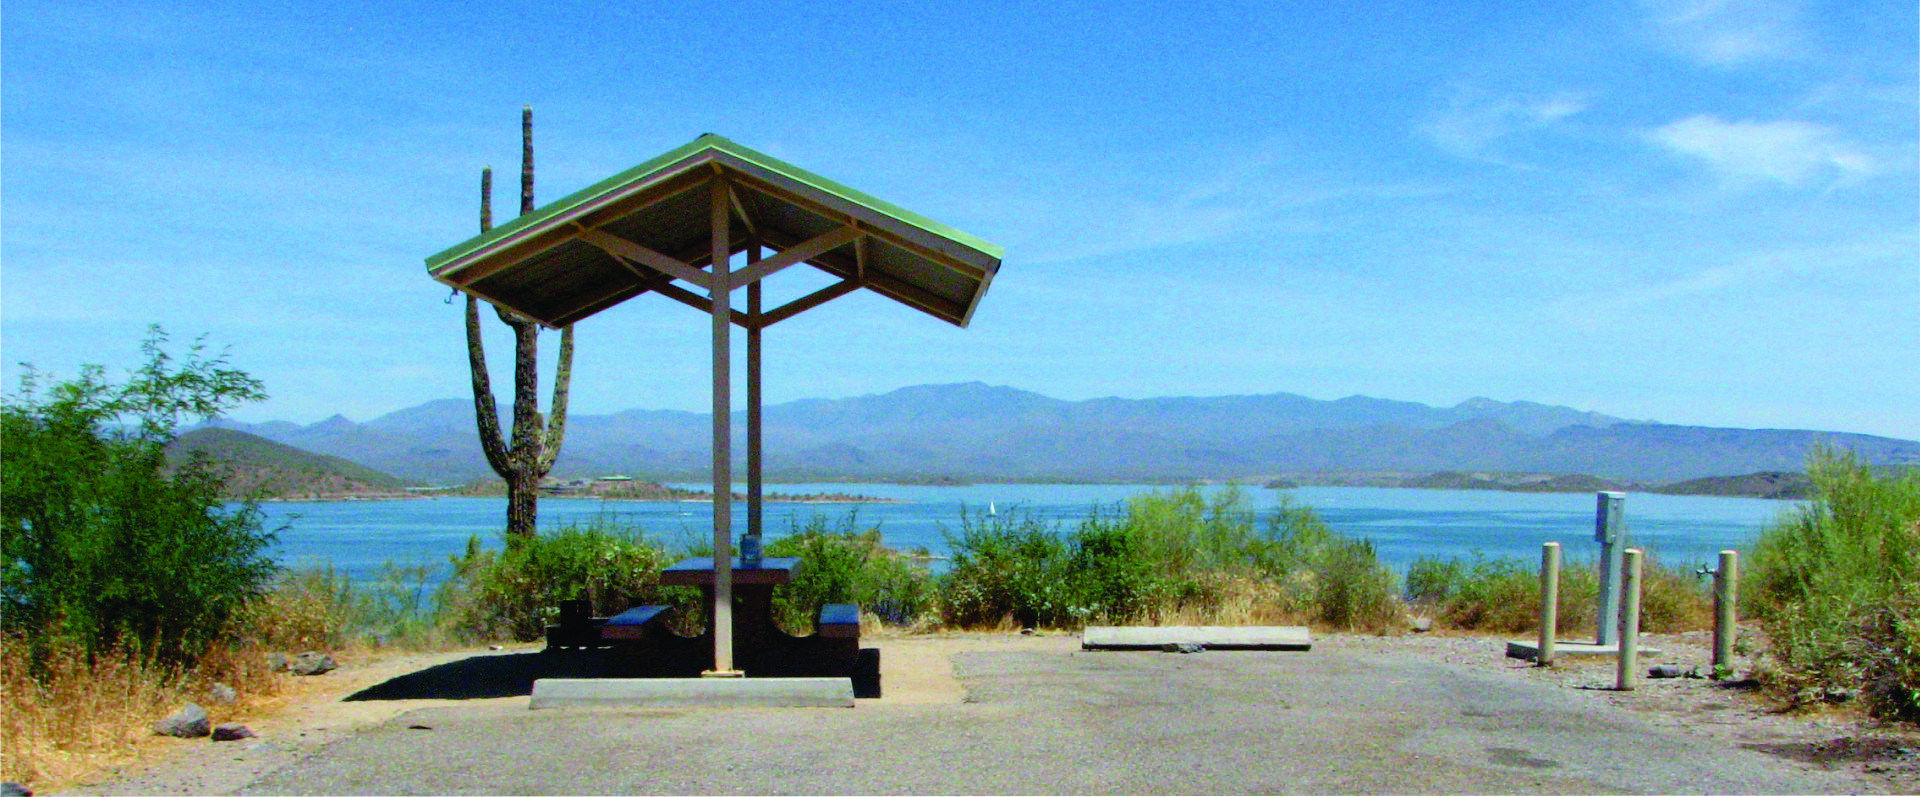 ALL campsites and restrooms in the Roadrunner Campground will be TEMPORARILY closed from July 5, 2022, to December 31, 2022.